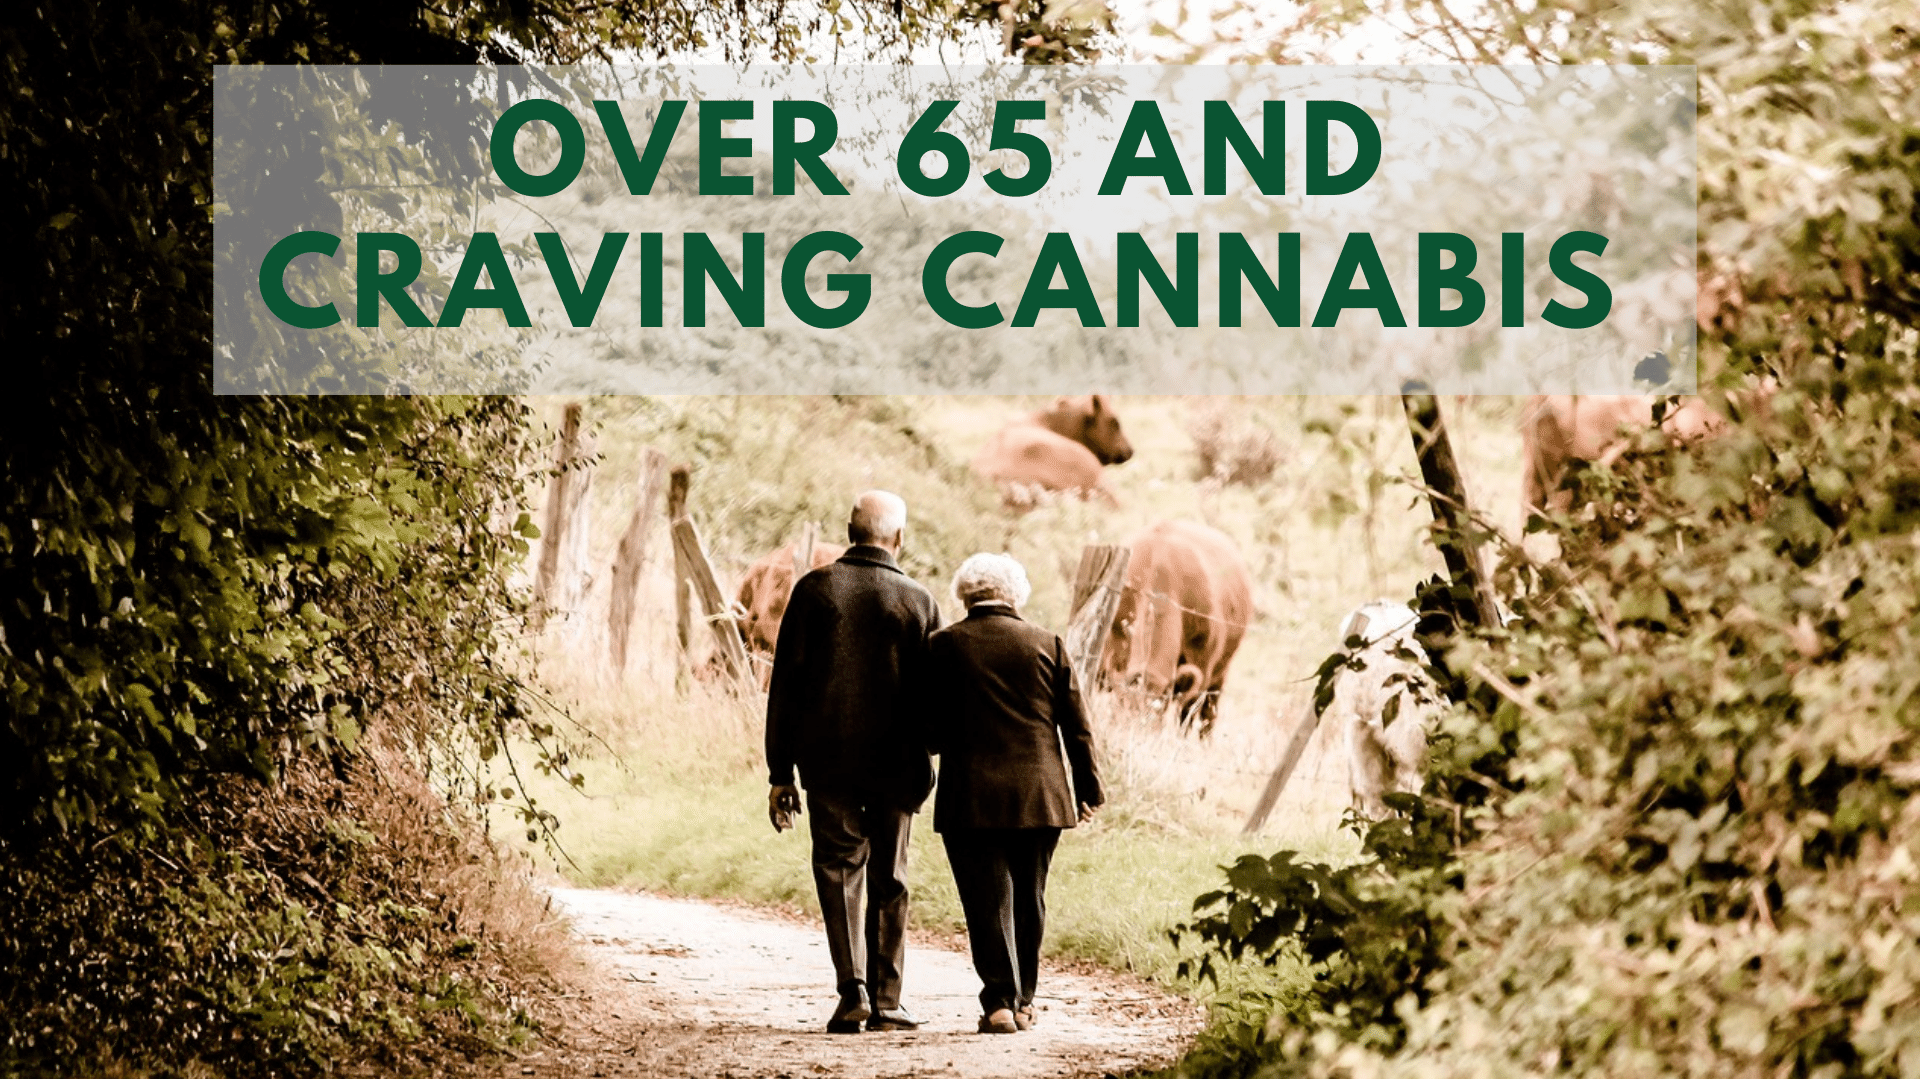 Over 65 and Craving Cannabis – A Look at a Huge Marketing Opportunity